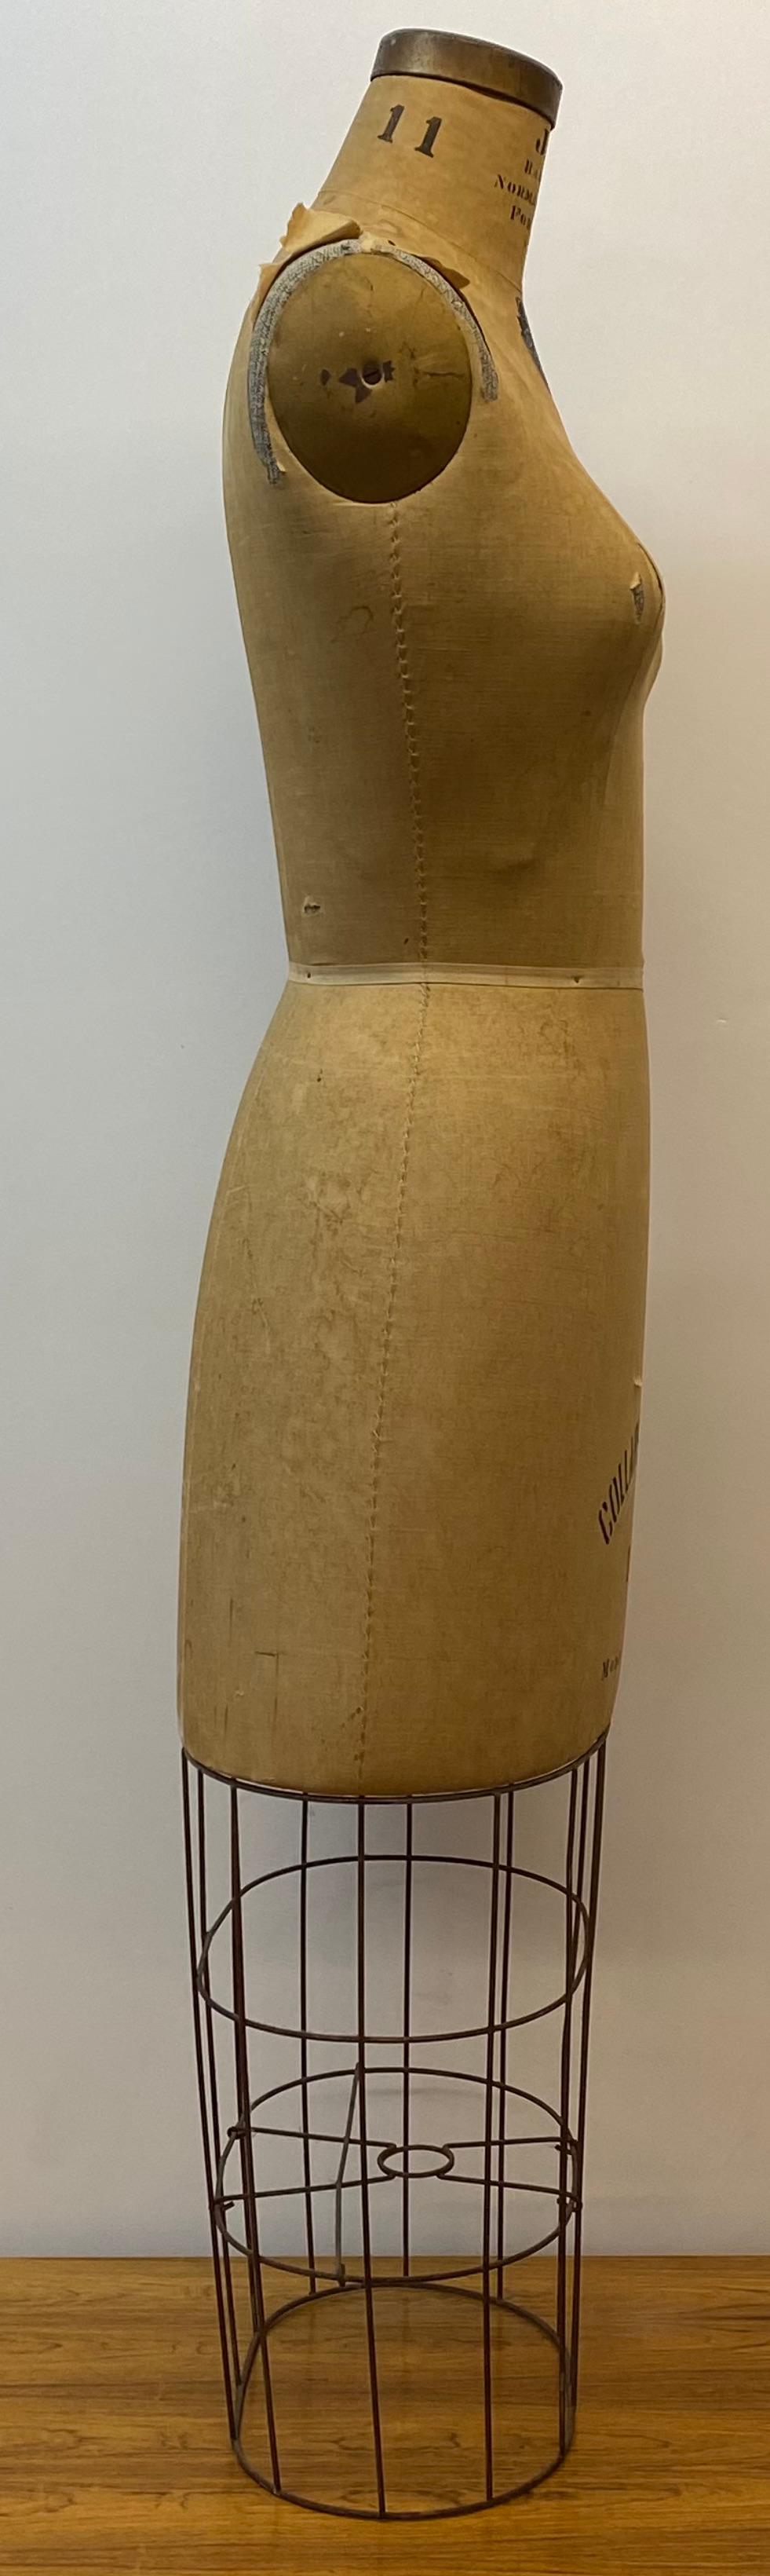 Antique Early 20th Century Dress Form by JR Bauman, New York 3